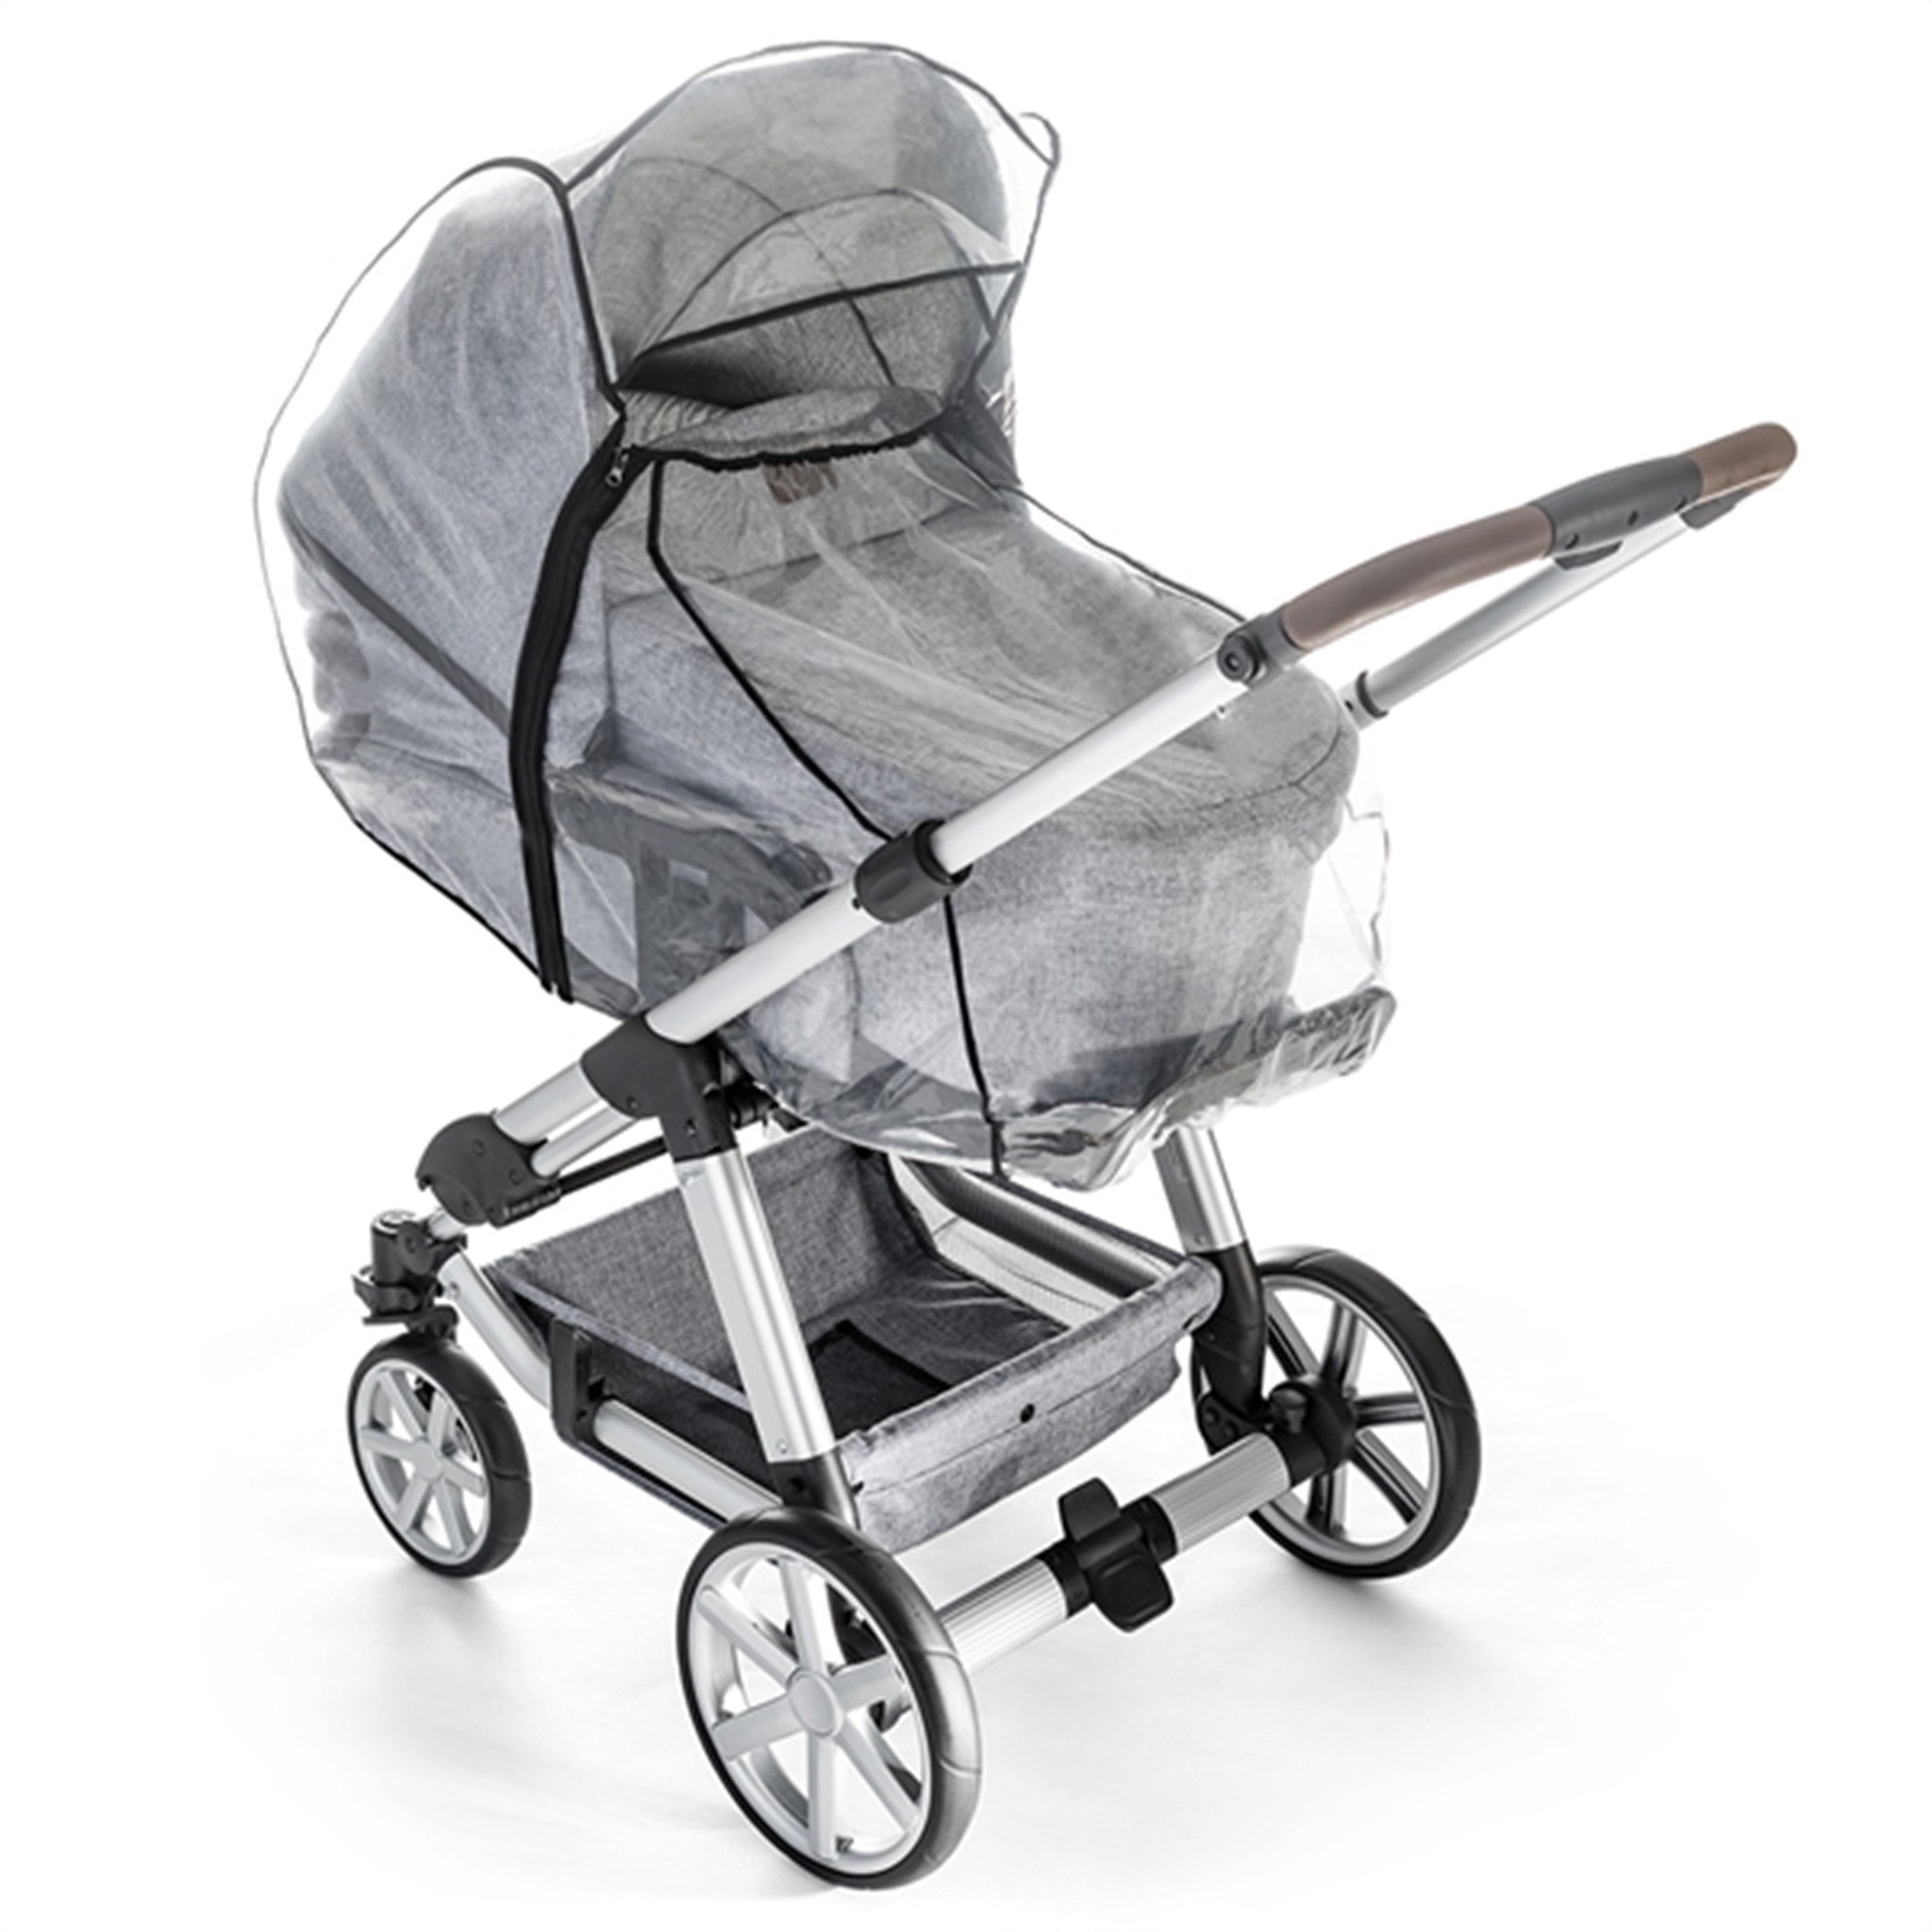 REER Rain cover for Prams and Combi-wagons 3